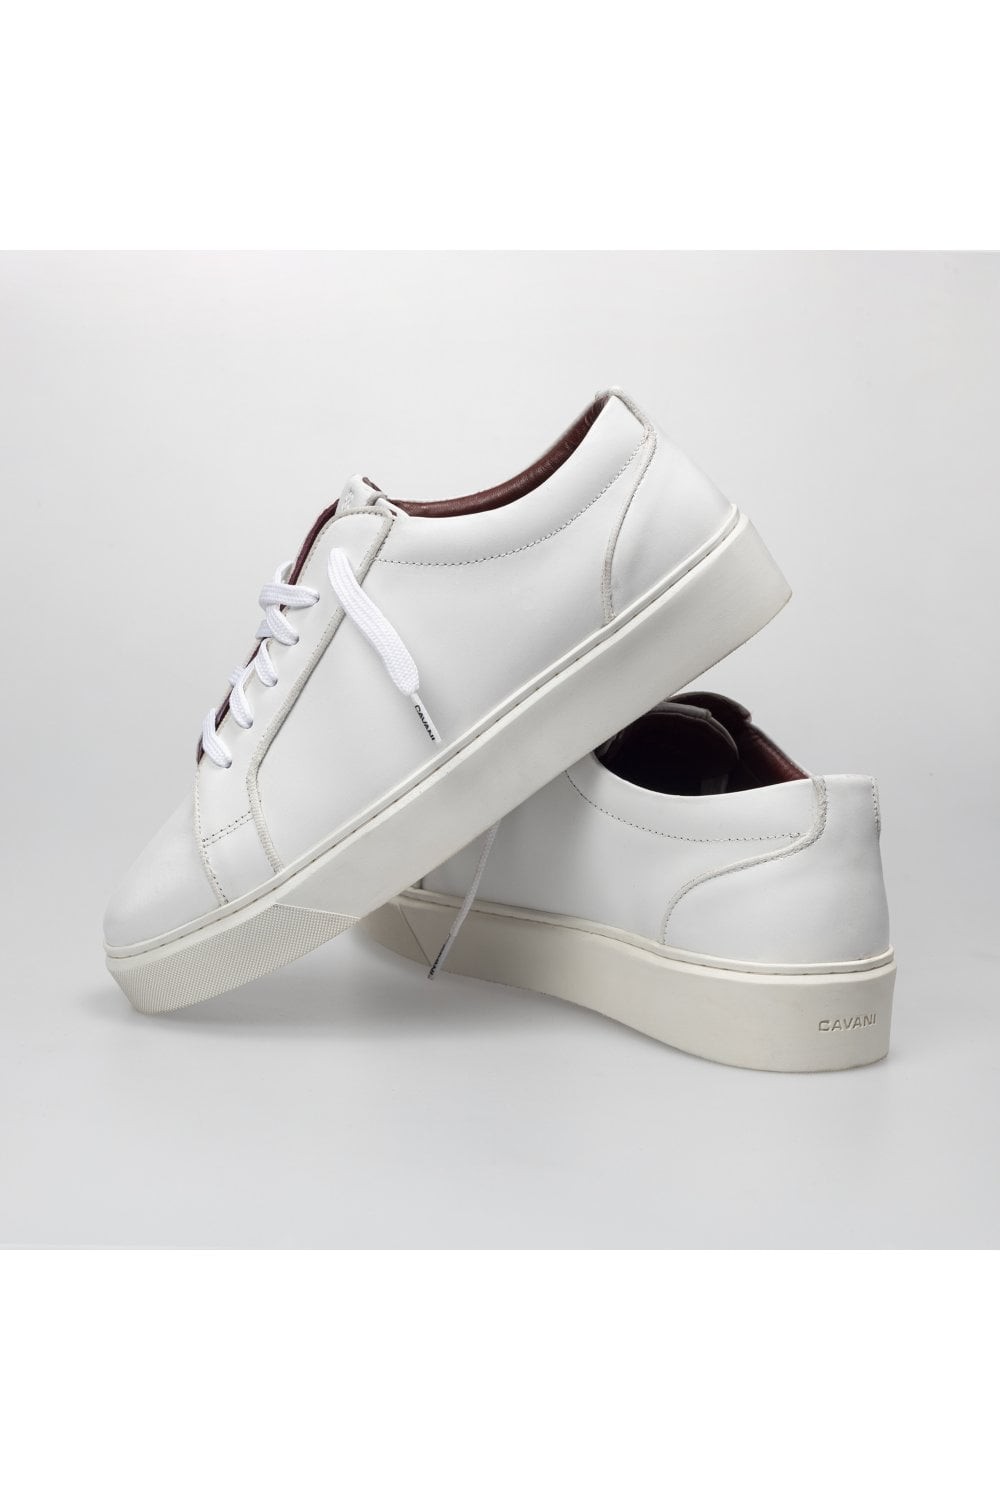 Men's Thick Rubber Sole Lace Up Sneakers - White